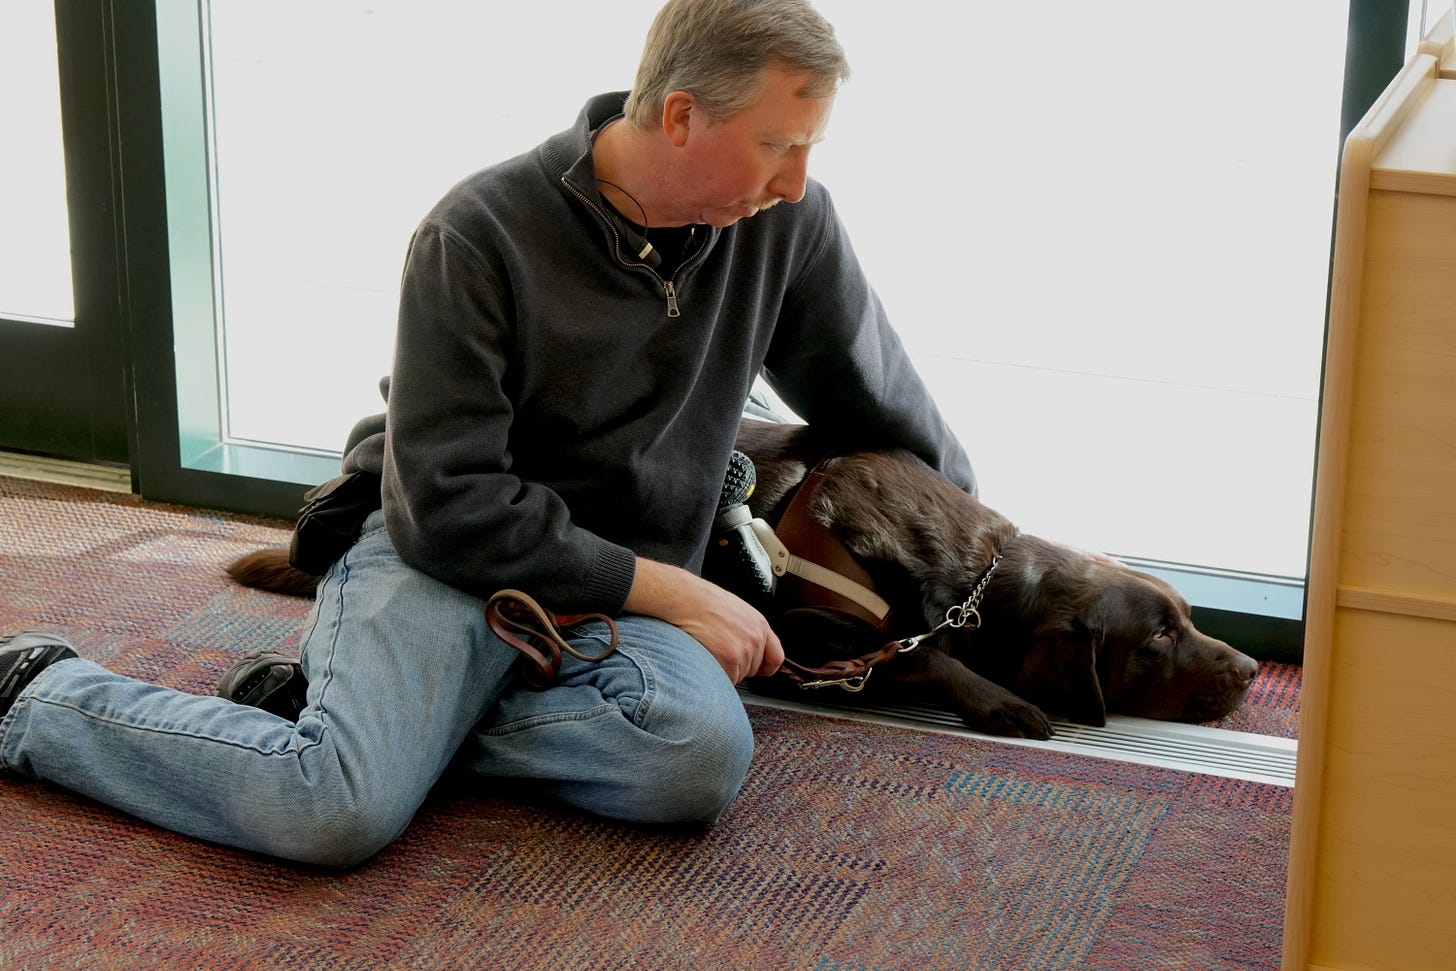 Todd Fahlstrom sits on the floor looking down at his chocolate lab seeing-eye dog